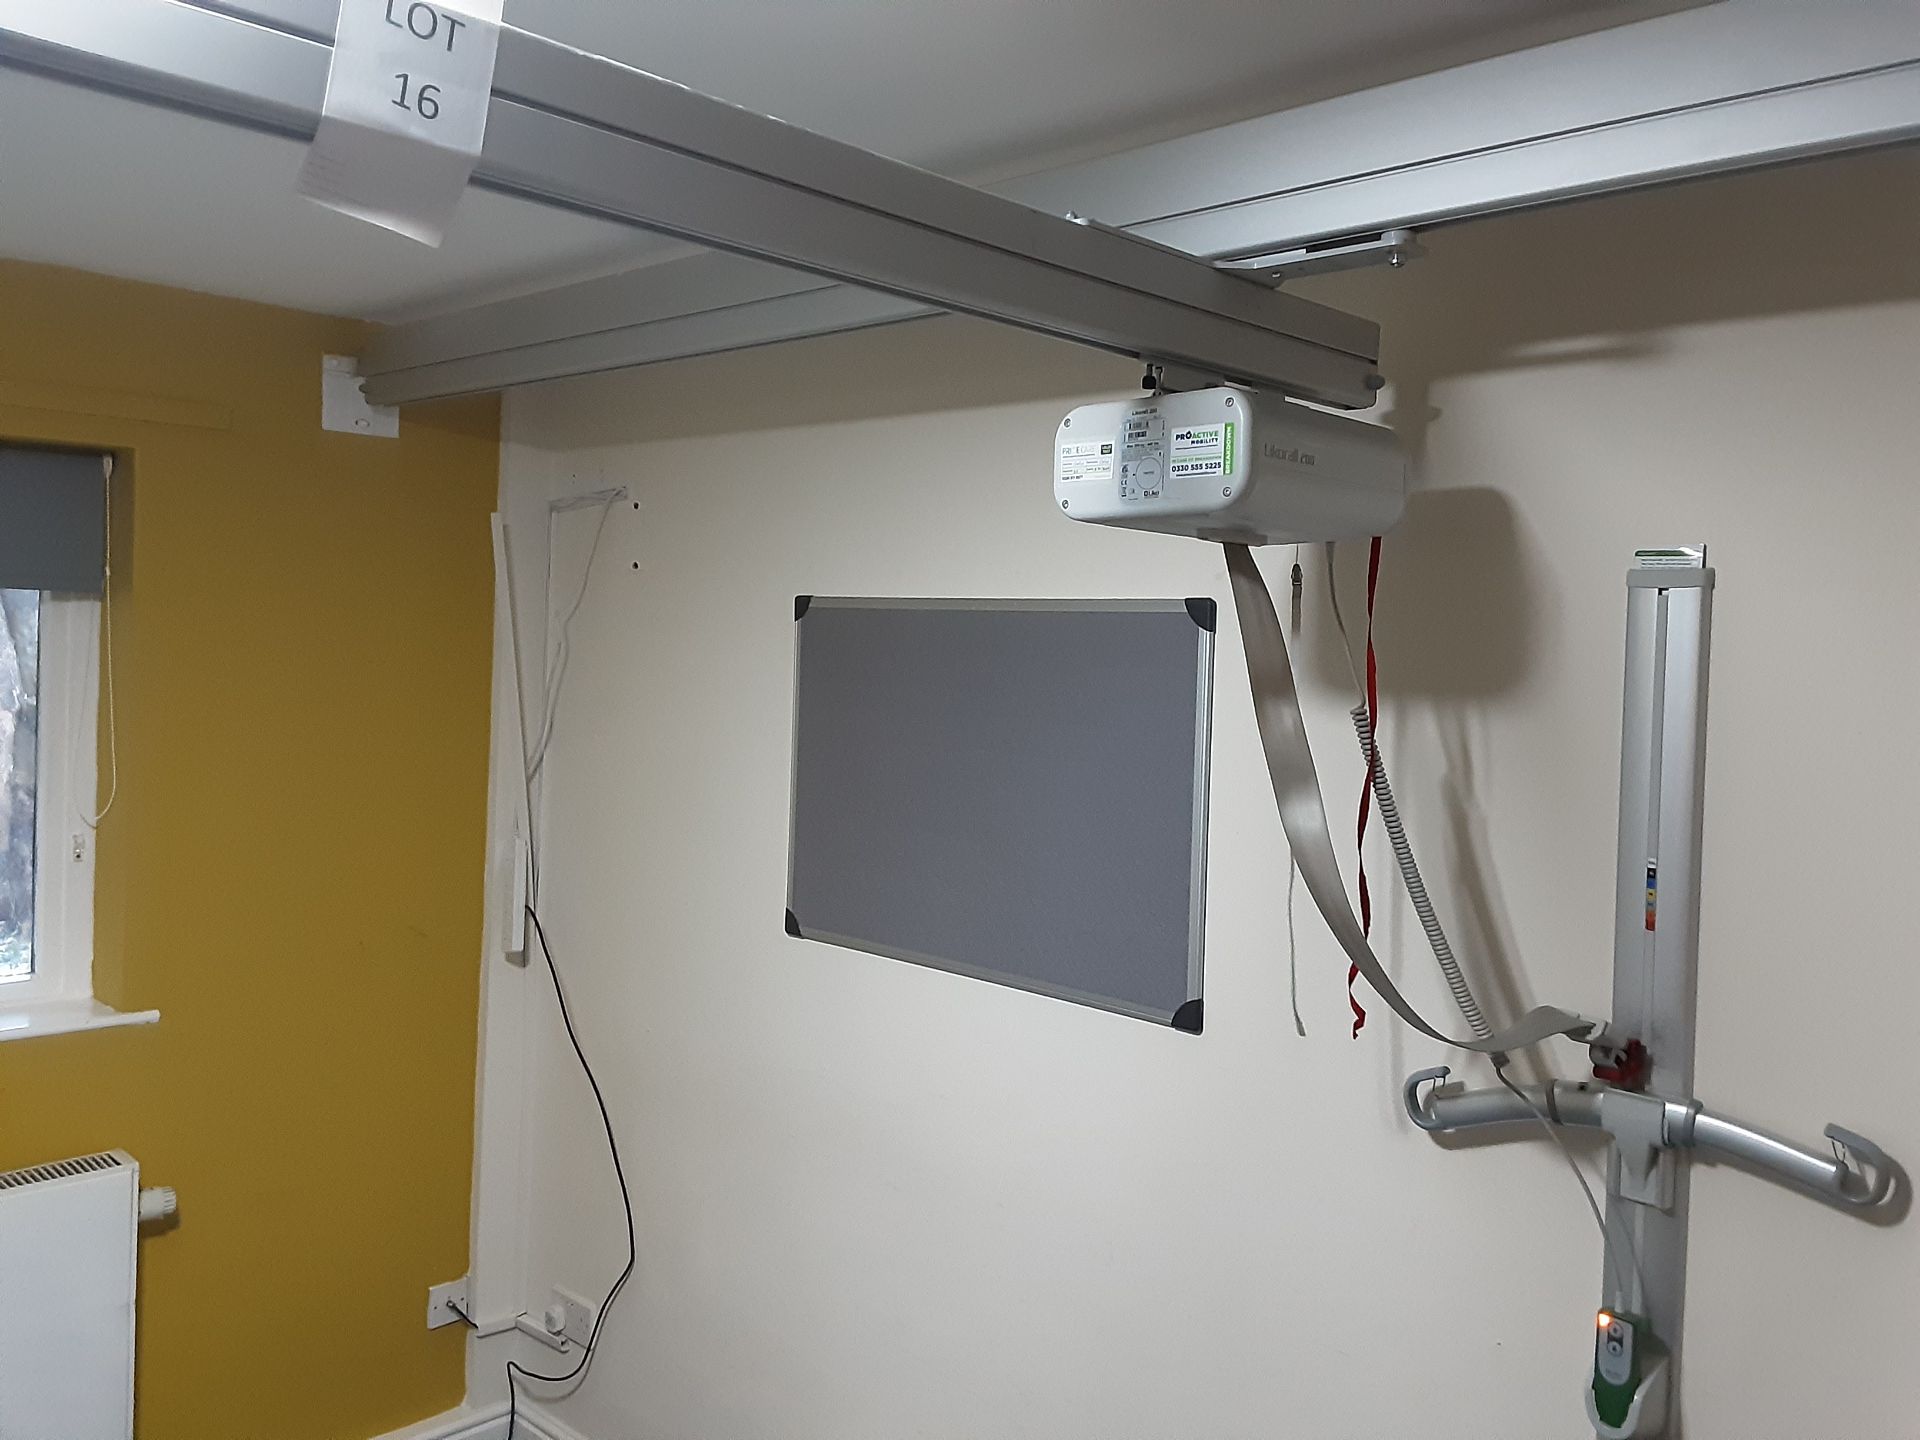 Likorall 200kg Patient Lift with KwikTrak Ceiling Rail System Serial No: 8707849 - Image 2 of 10